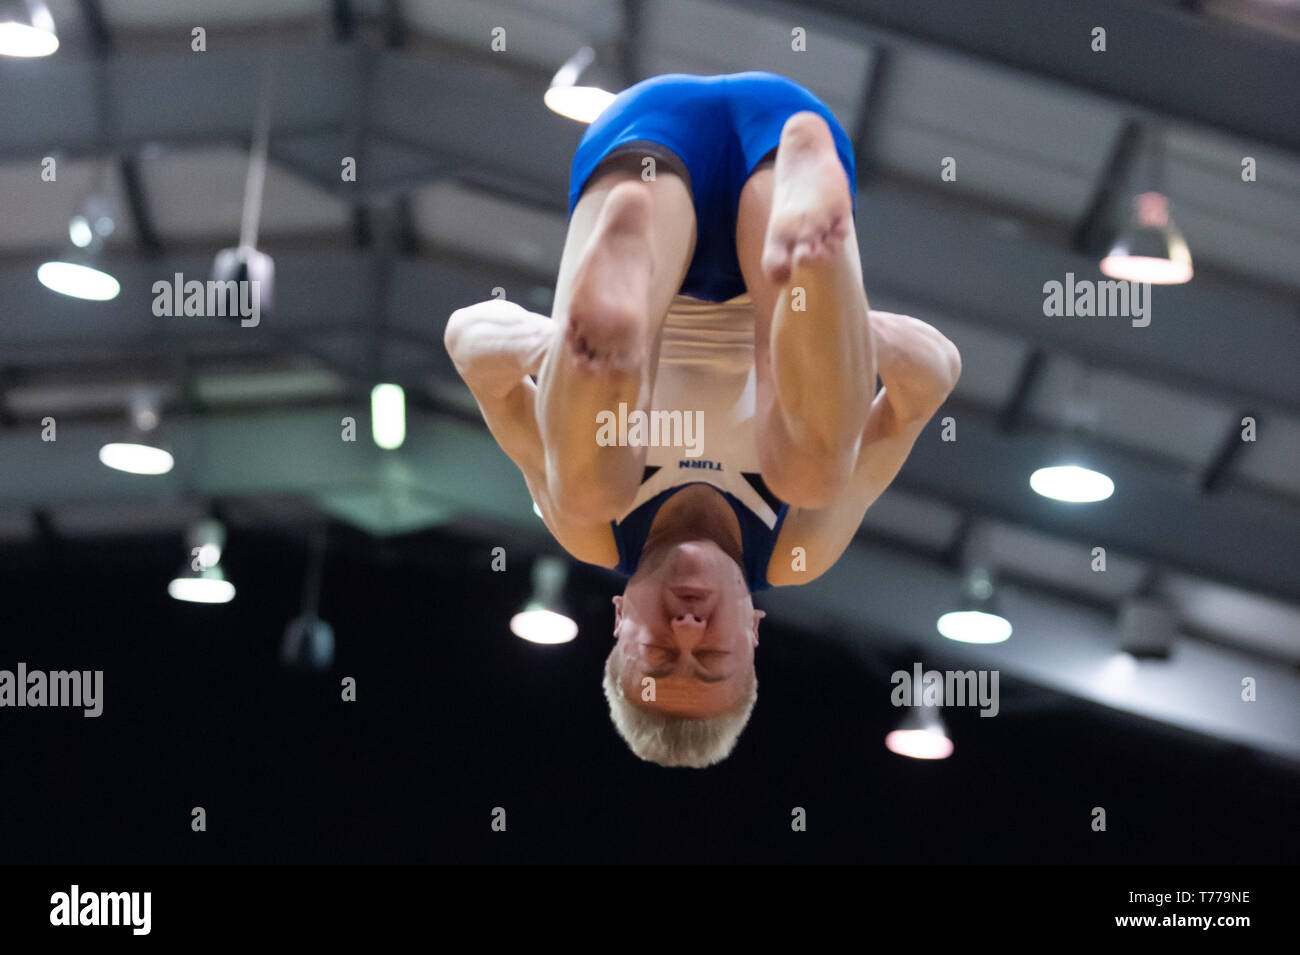 Telford, England, UK. 27 April, 2018. Will Cowen (Pinewood Gymnastics Club) in action during Spring Series 1 at the Telford International Centre, Telford, UK. Stock Photo